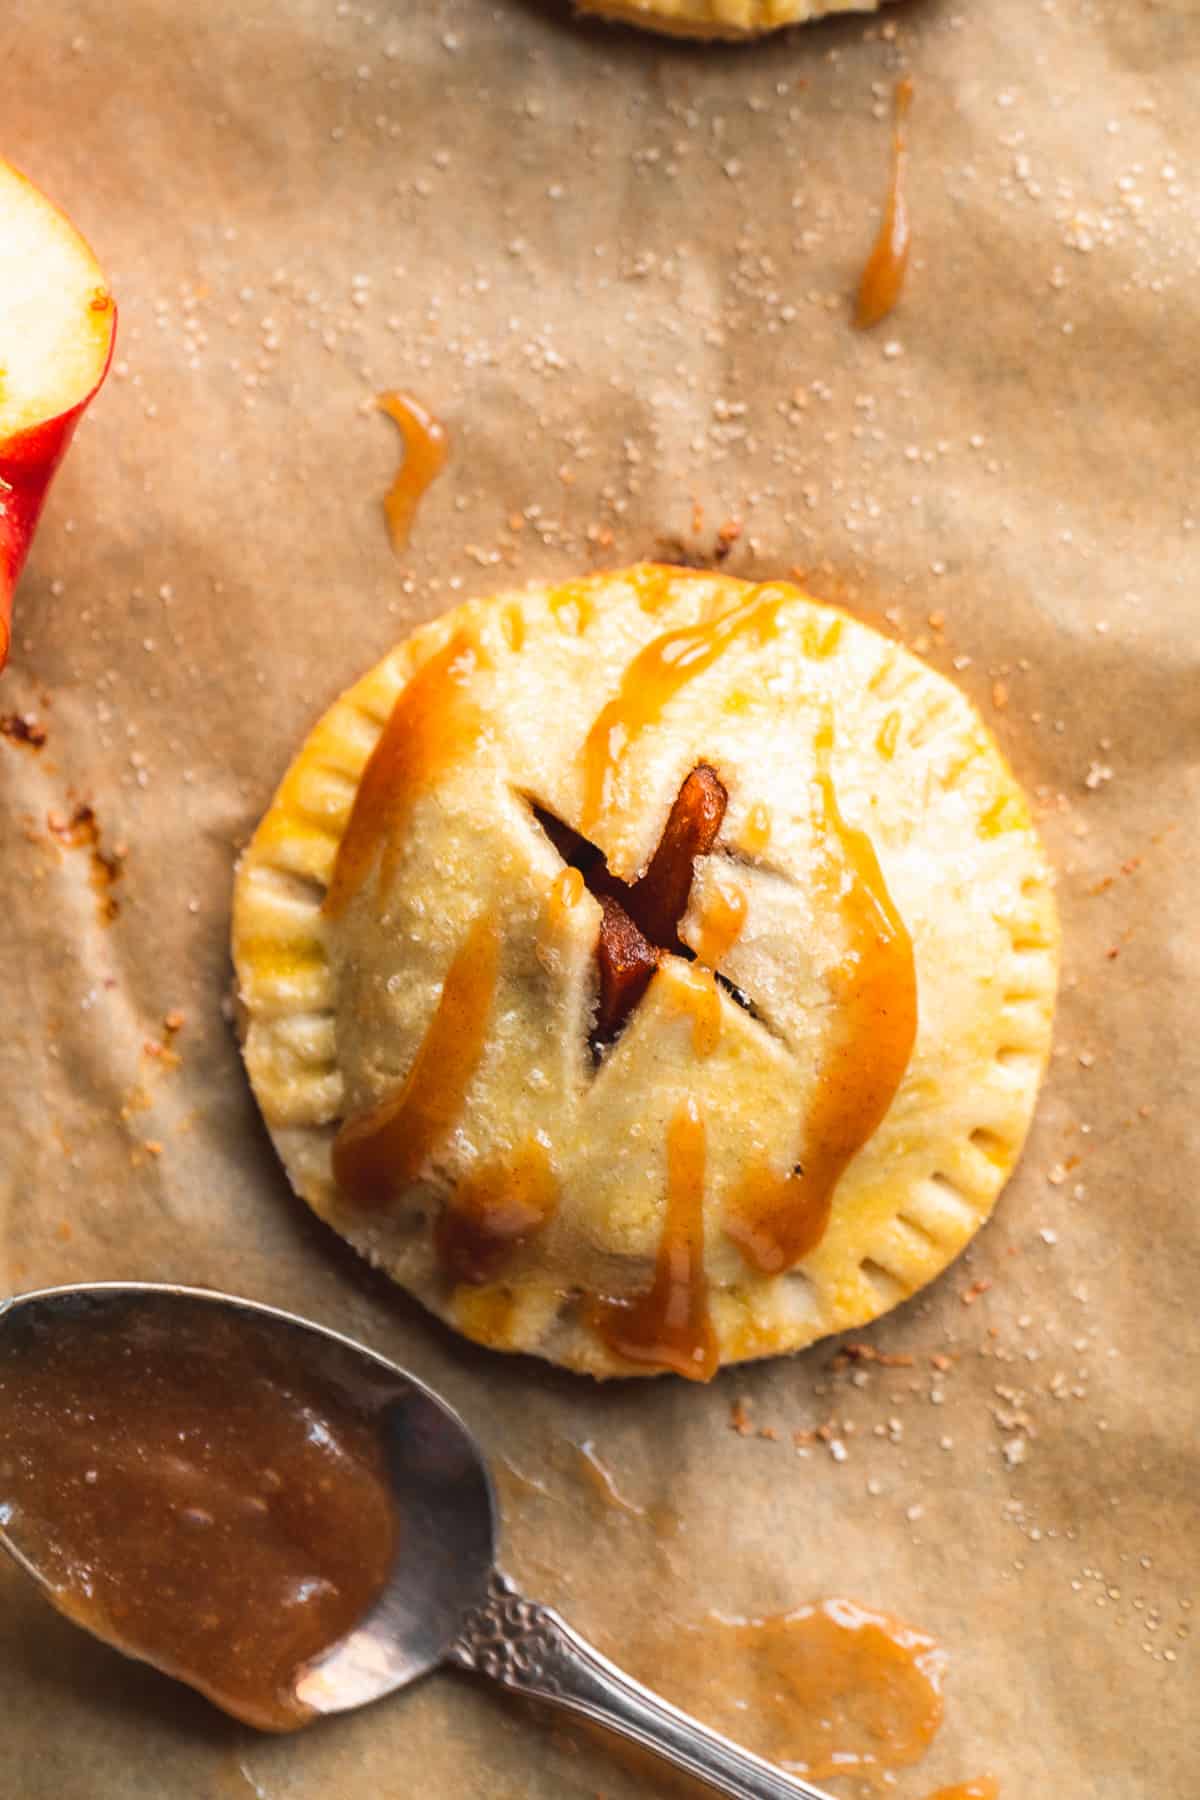 Up close view of a mini apple pie with caramel sauce on top.